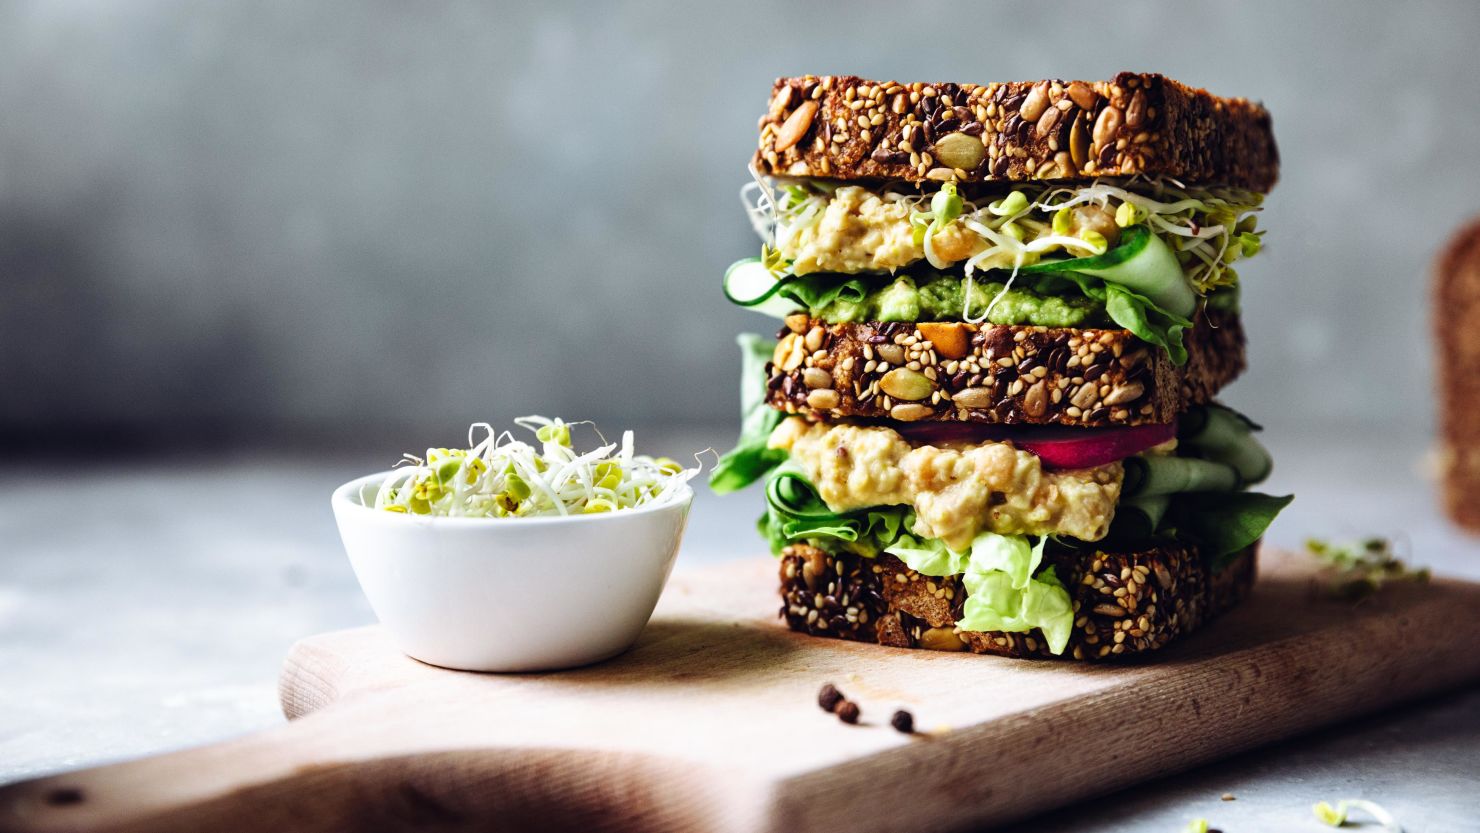 Give your kid's school lunch an upgrade with this cucumber, radish and smashed avocado  sandwich on sourdough.